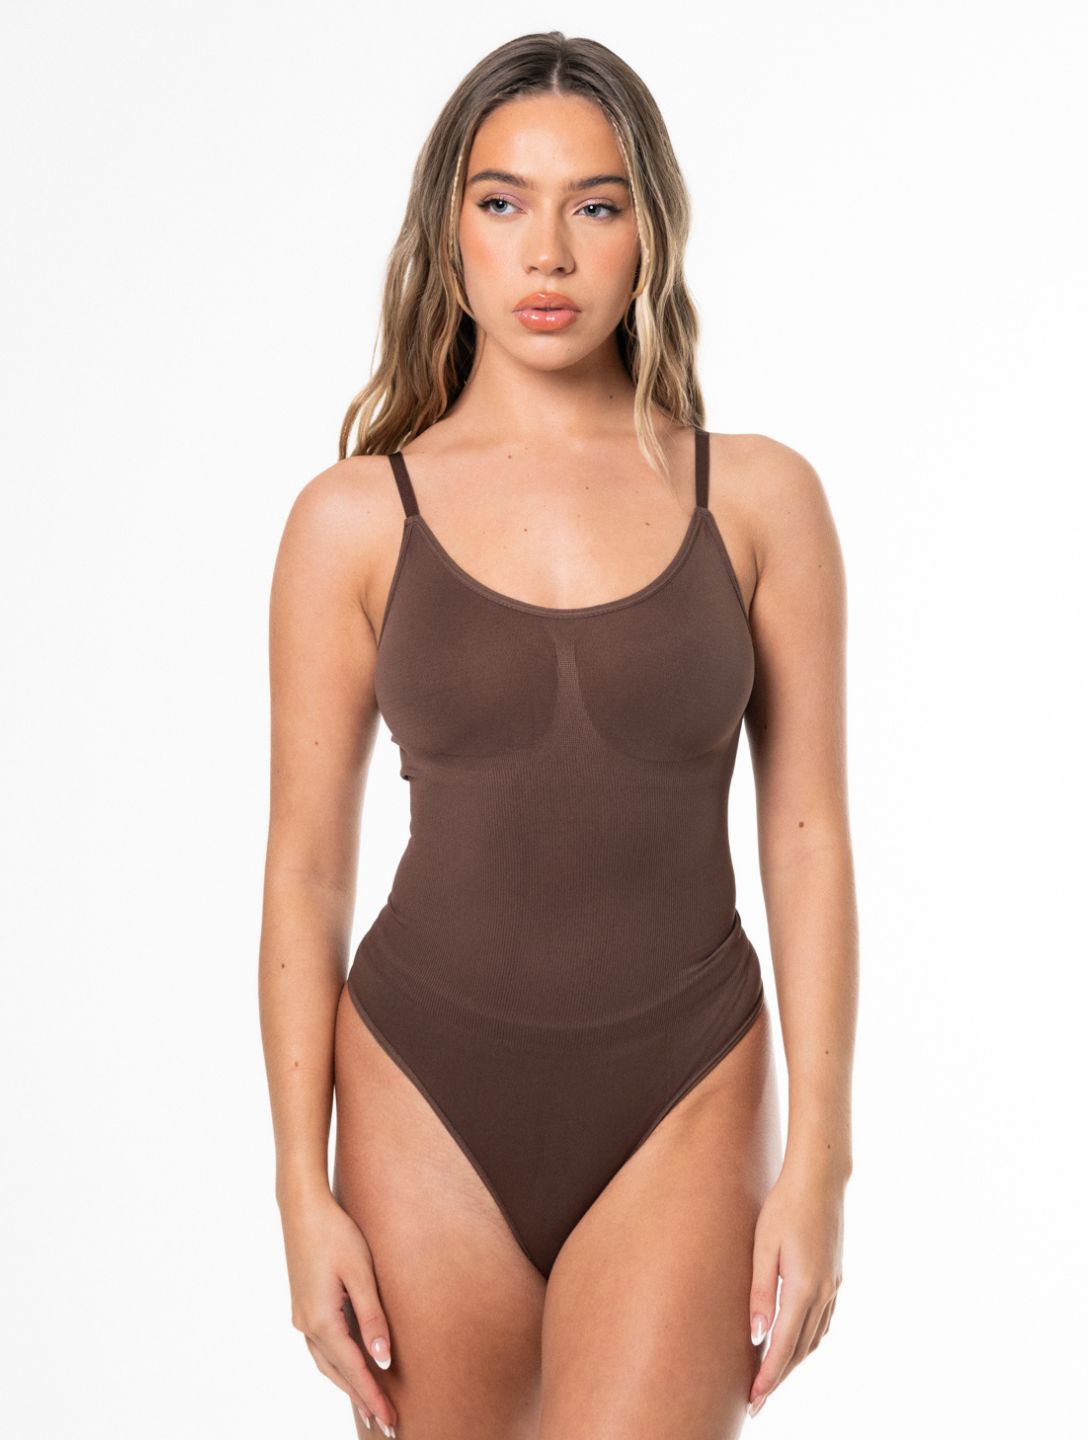 Why You Need a Comfortable Sculpting Bodysuit